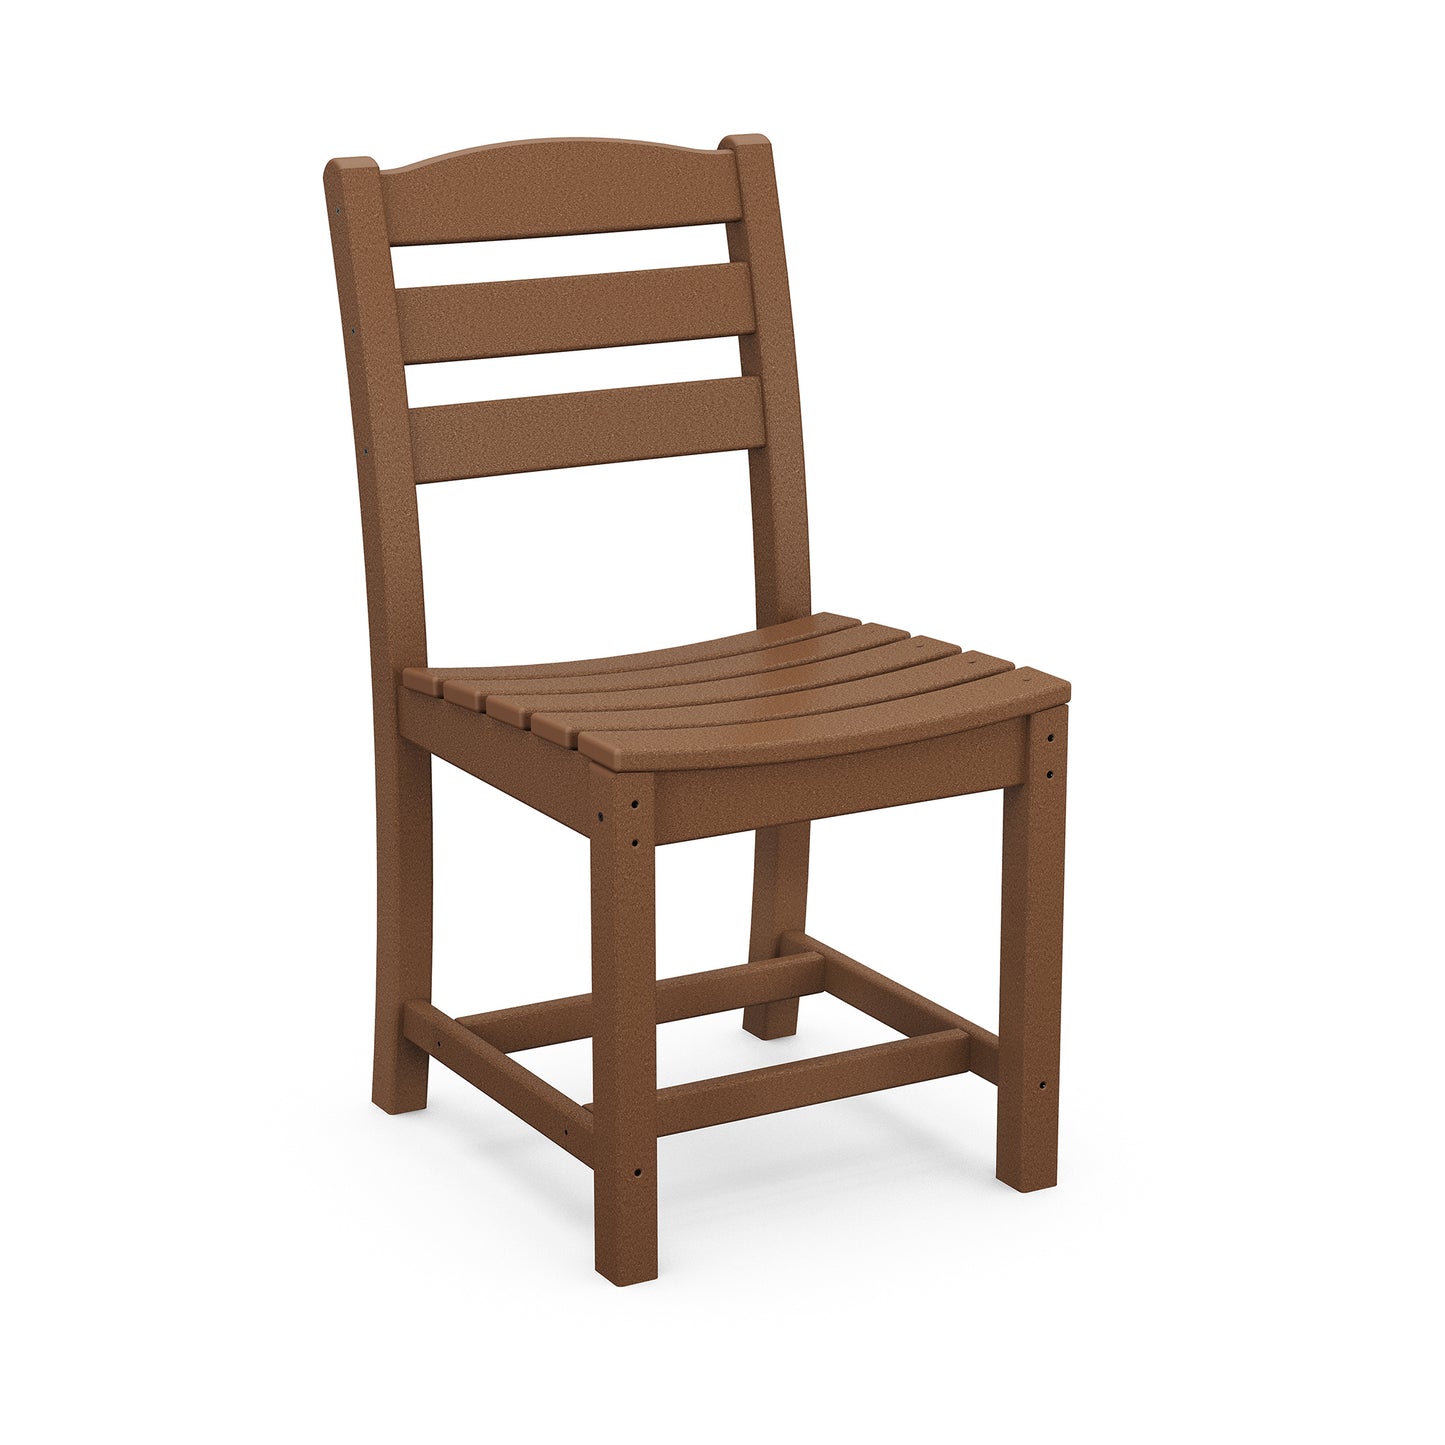 A brown POLYWOOD® La Casa Cafe Outdoor Dining Side Chair with a slatted back and seat, standing on a plain white background.